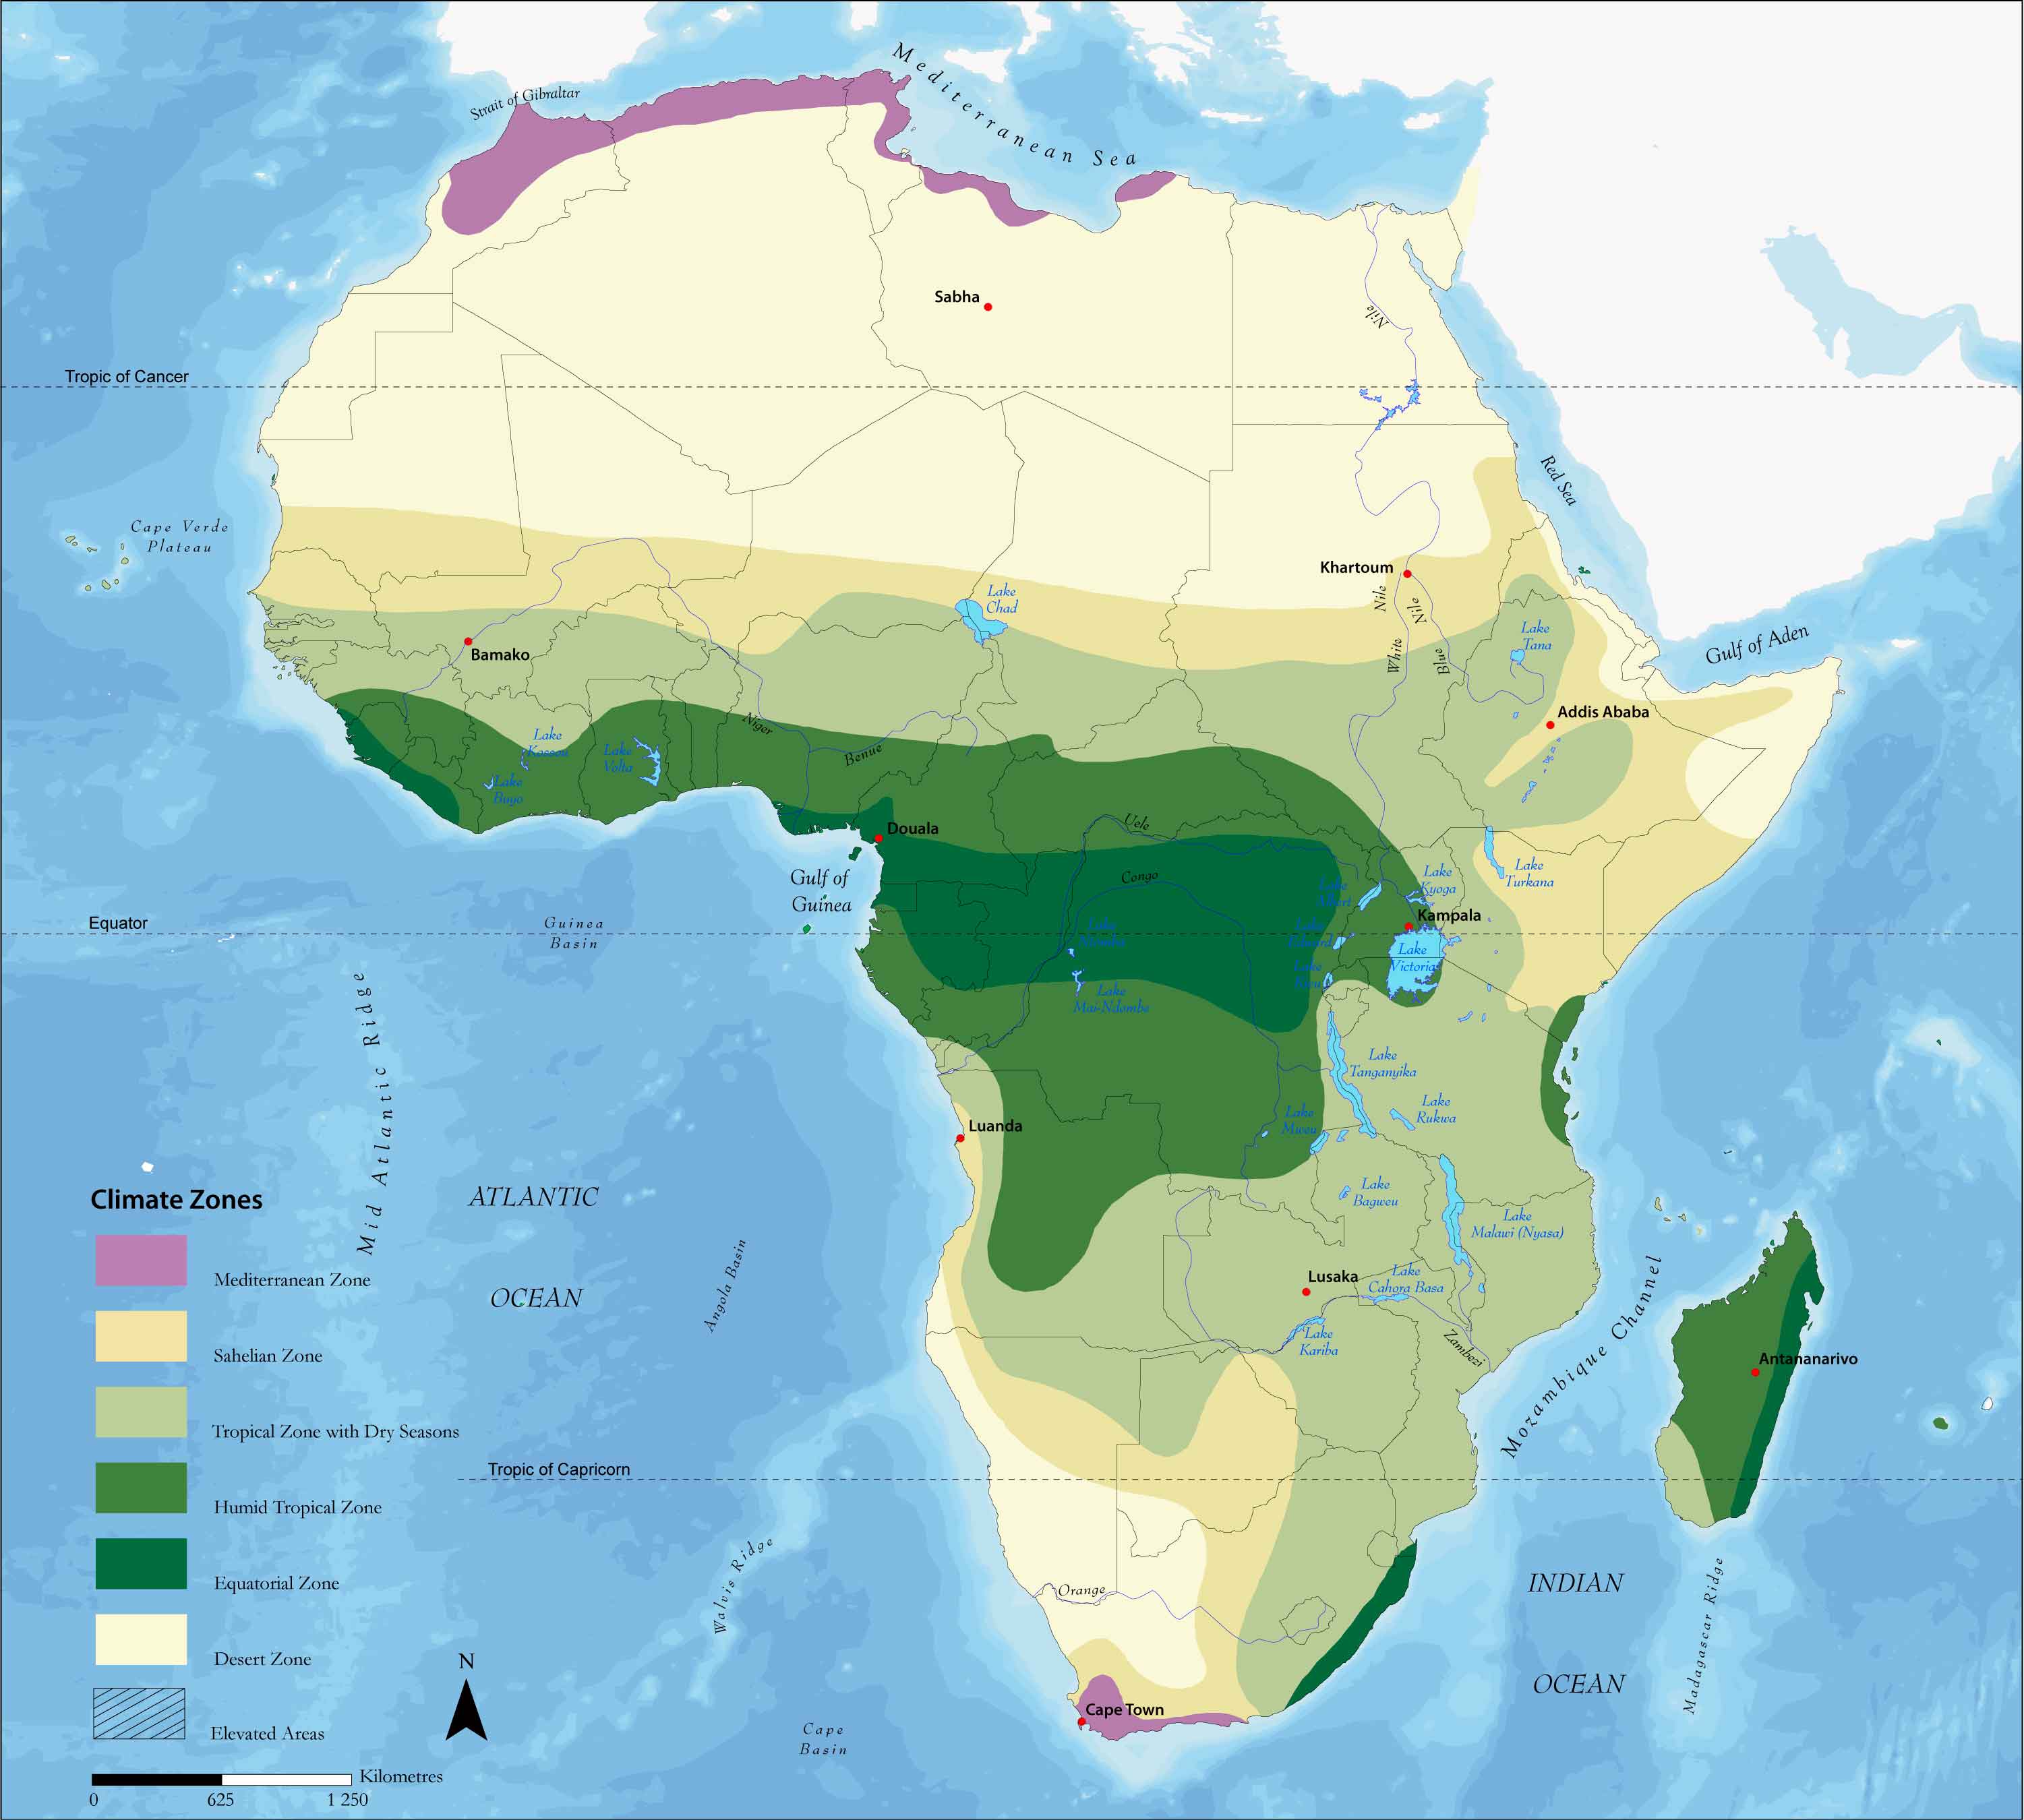 map of africa climate zones Africa Climate Zones Full Size Gifex map of africa climate zones